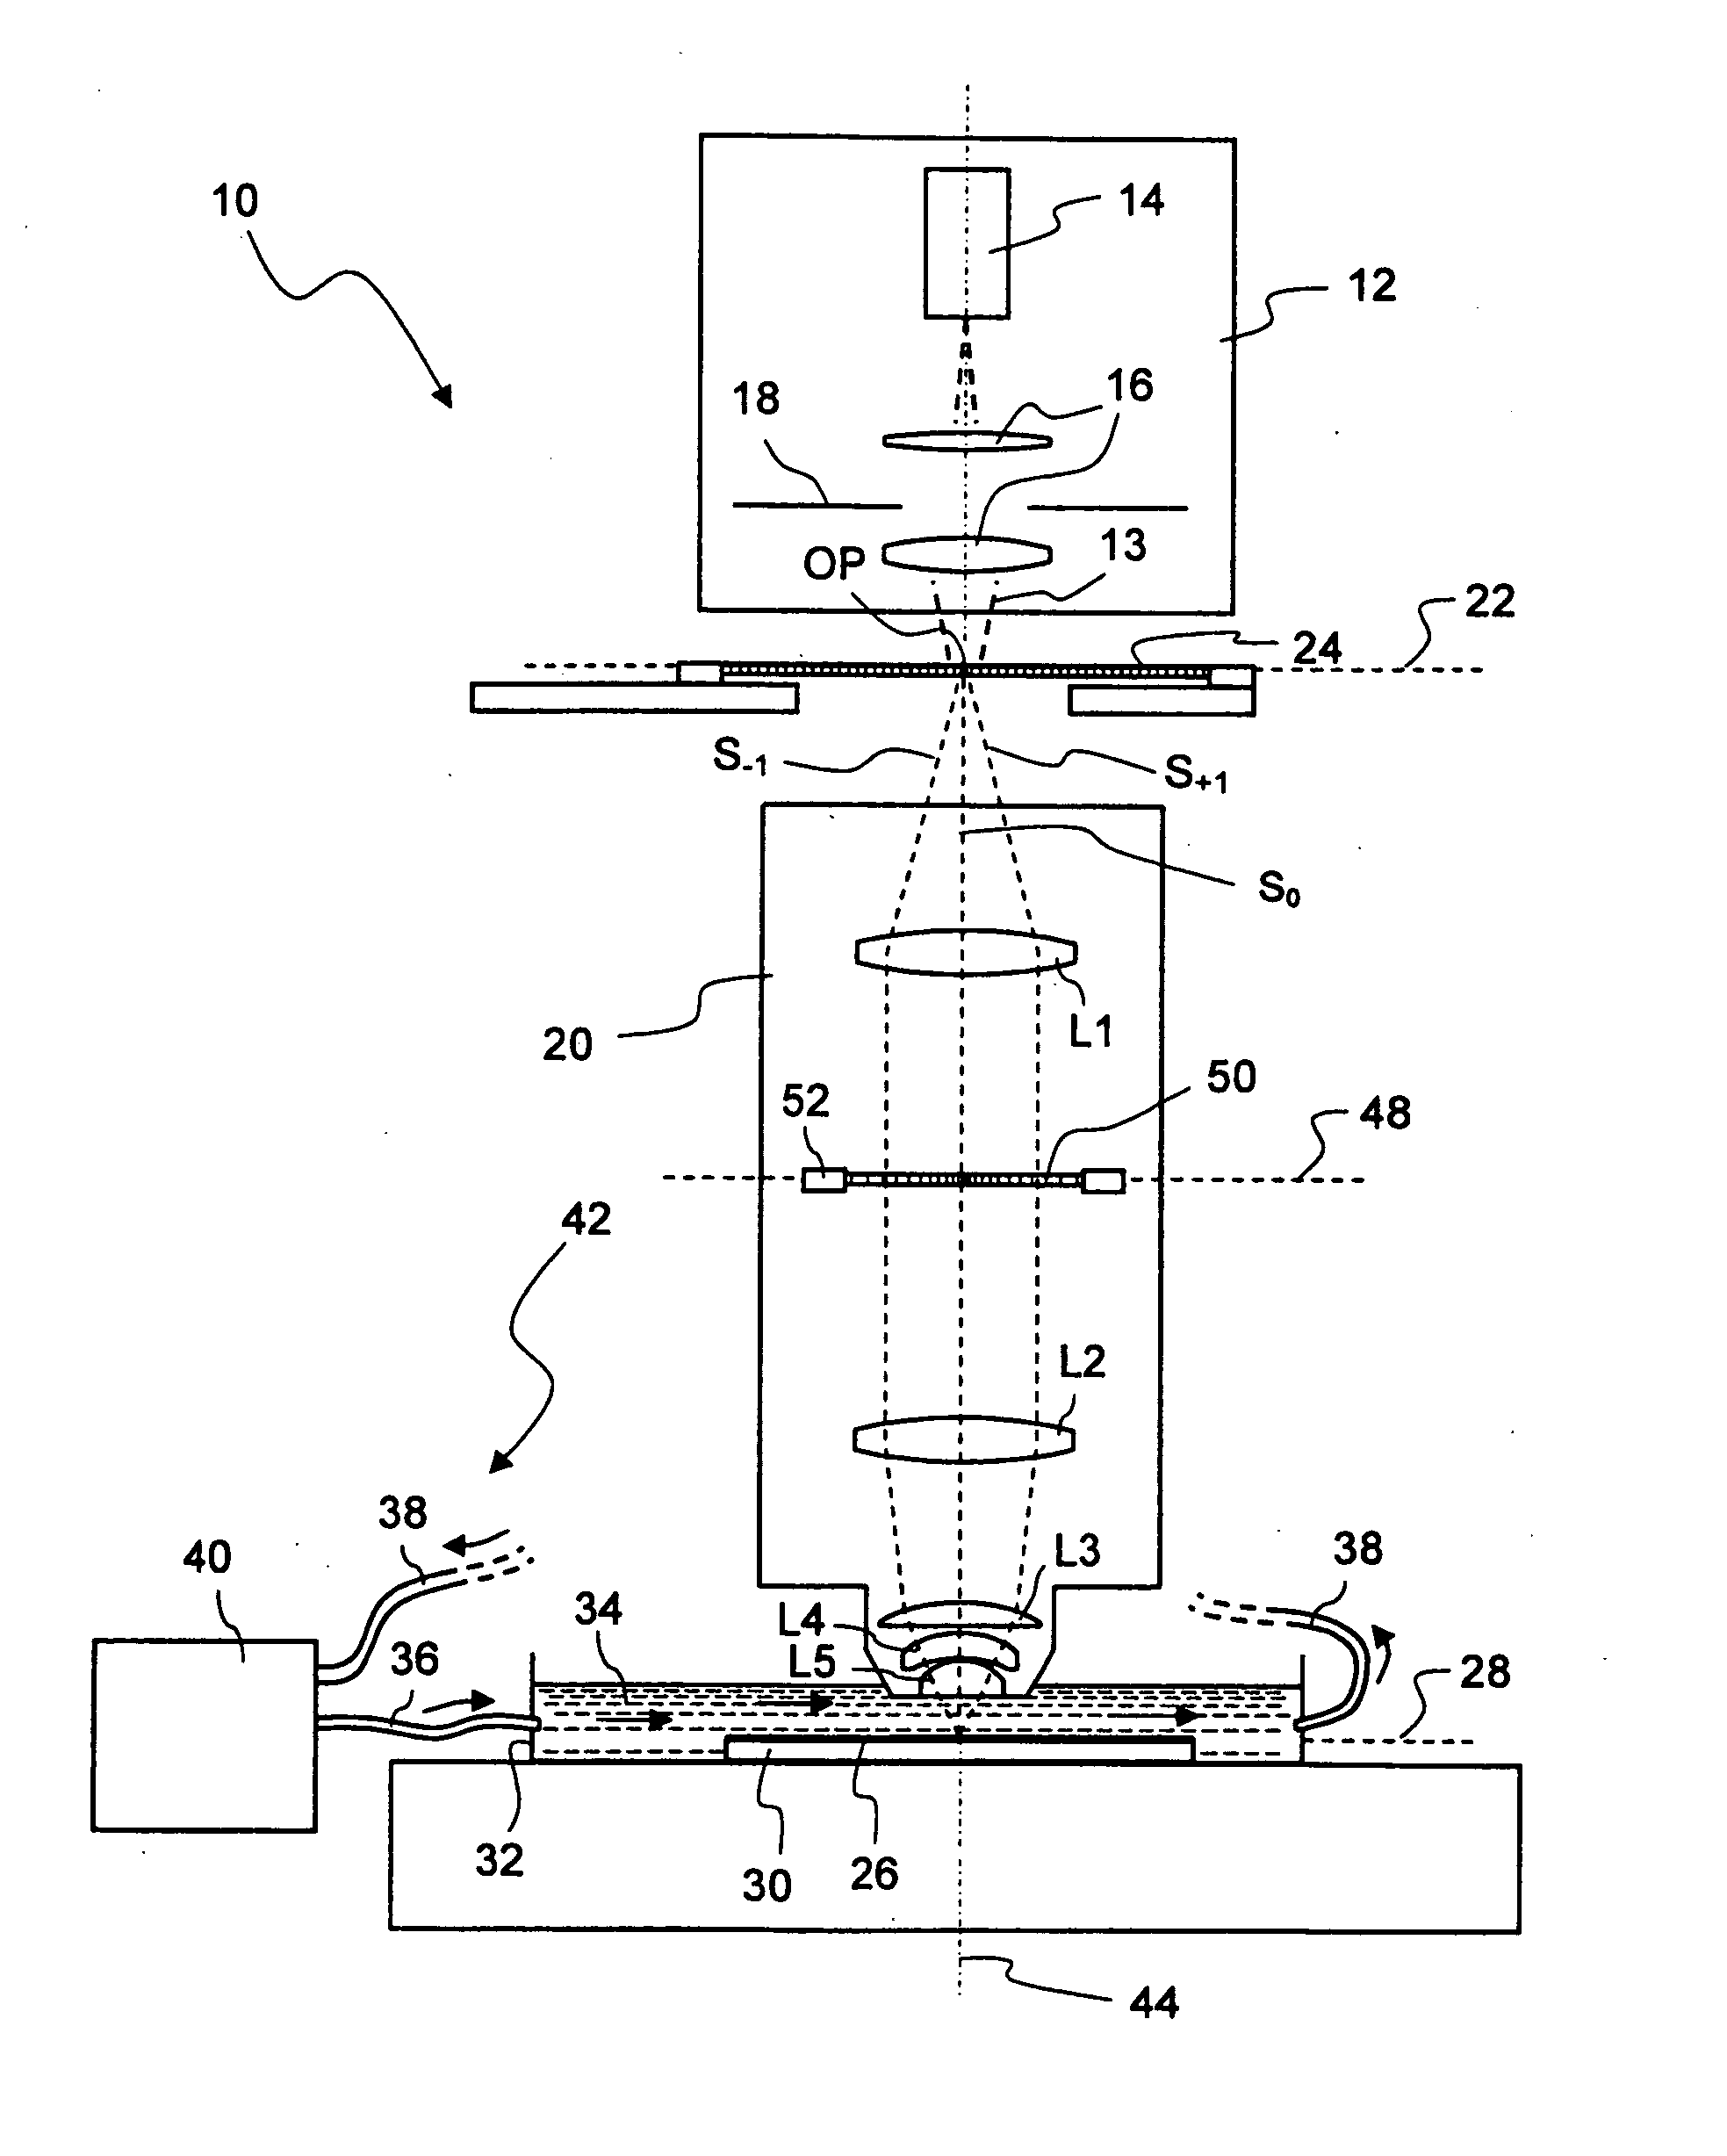 Microlithographic projection exposure apparatus with immersion projection lens